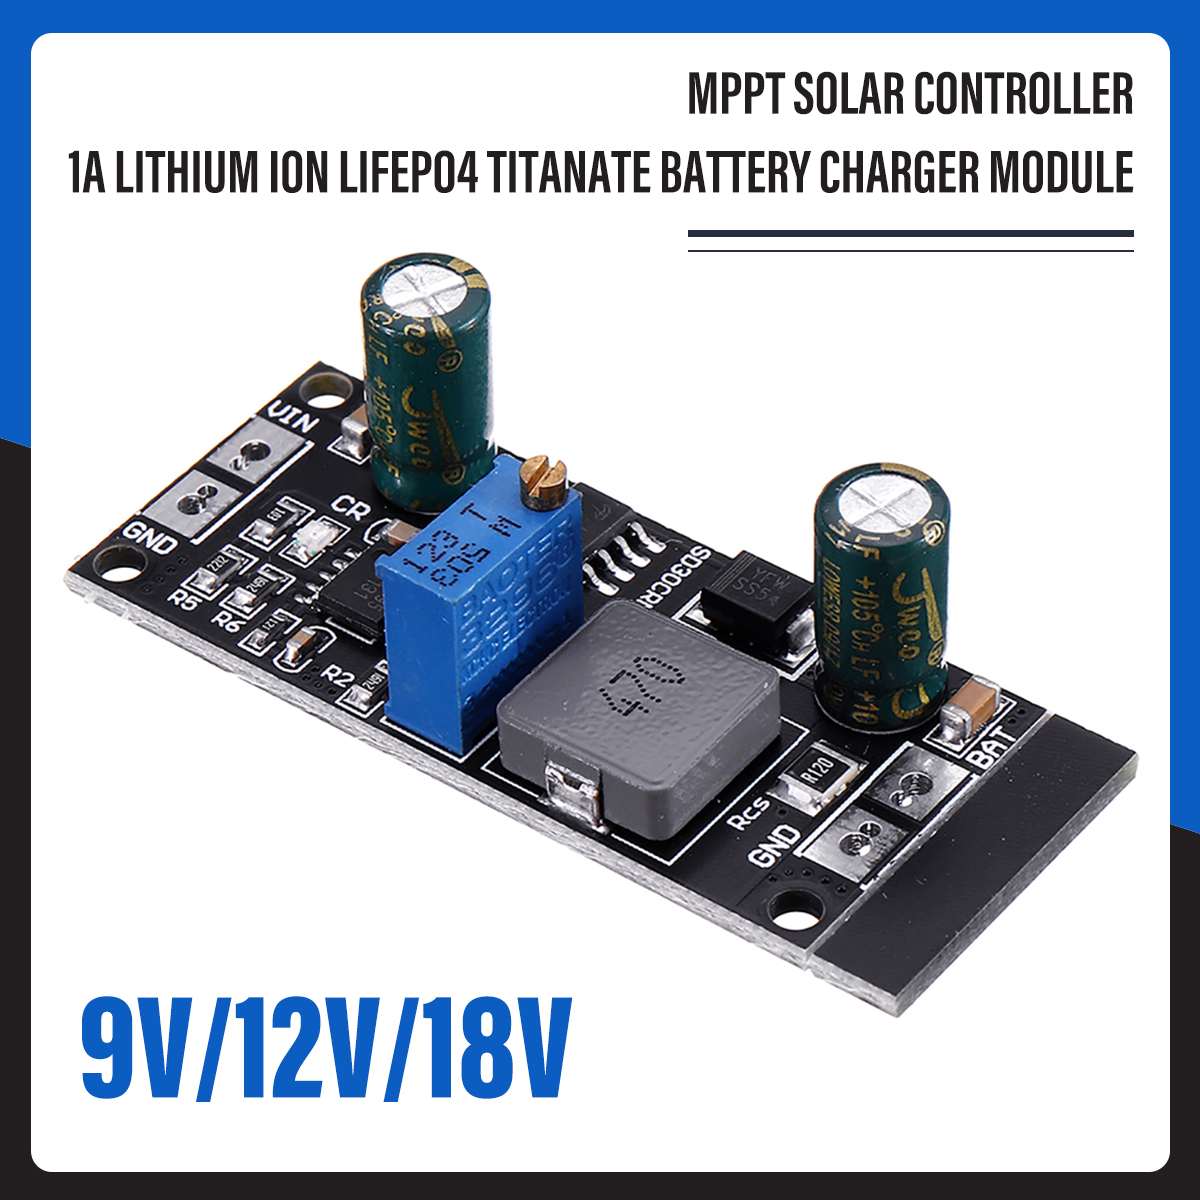 MPPT Solar Charge Controller Lithium ion LiFePO4 Titanate Solar Storage Battery Charger Controller DIY Module 9V 12V 18V New